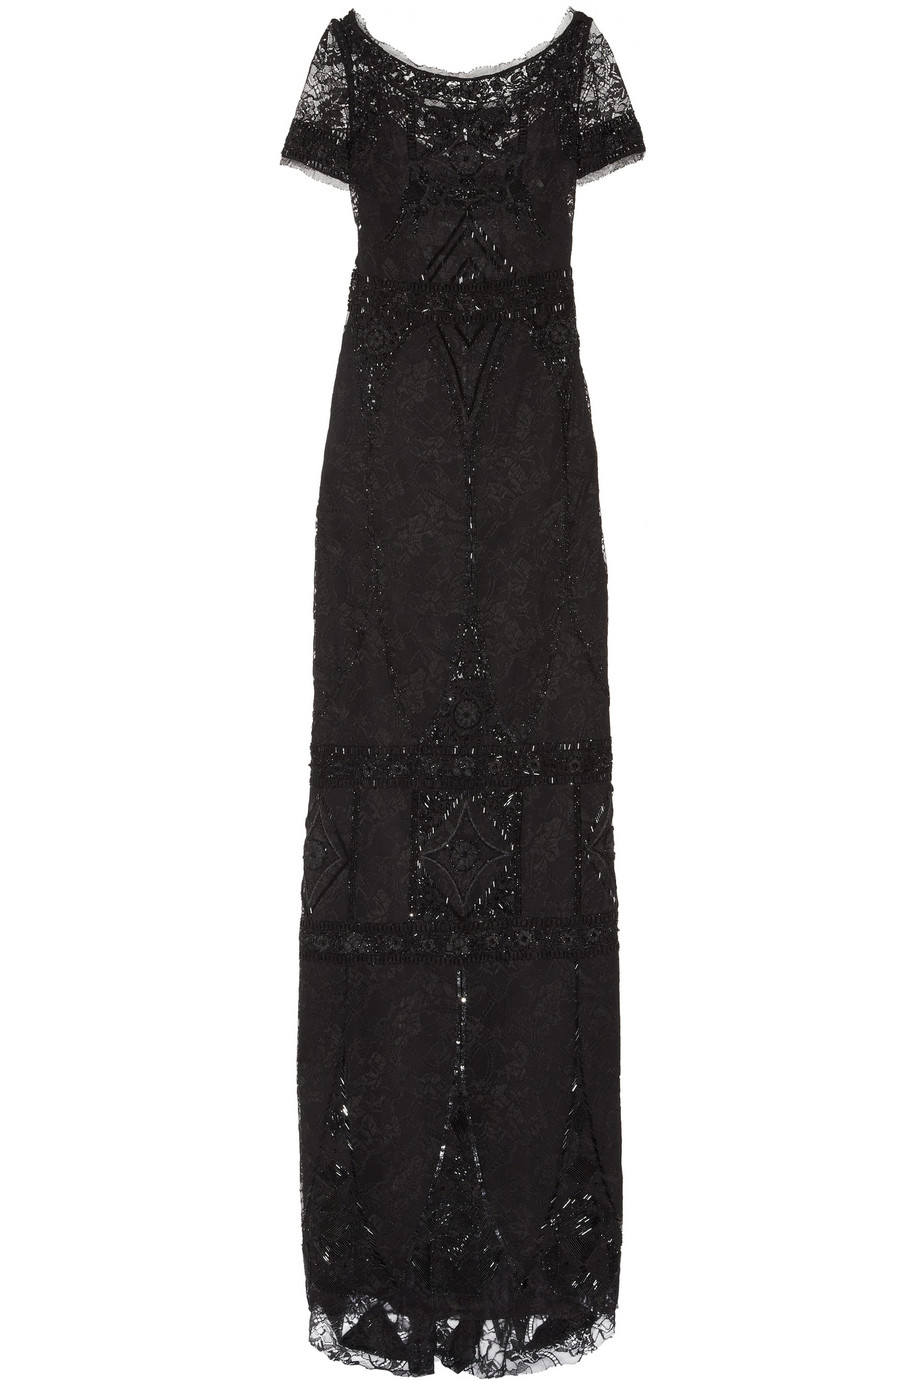 Beaded lace gown by Emilio Pucci